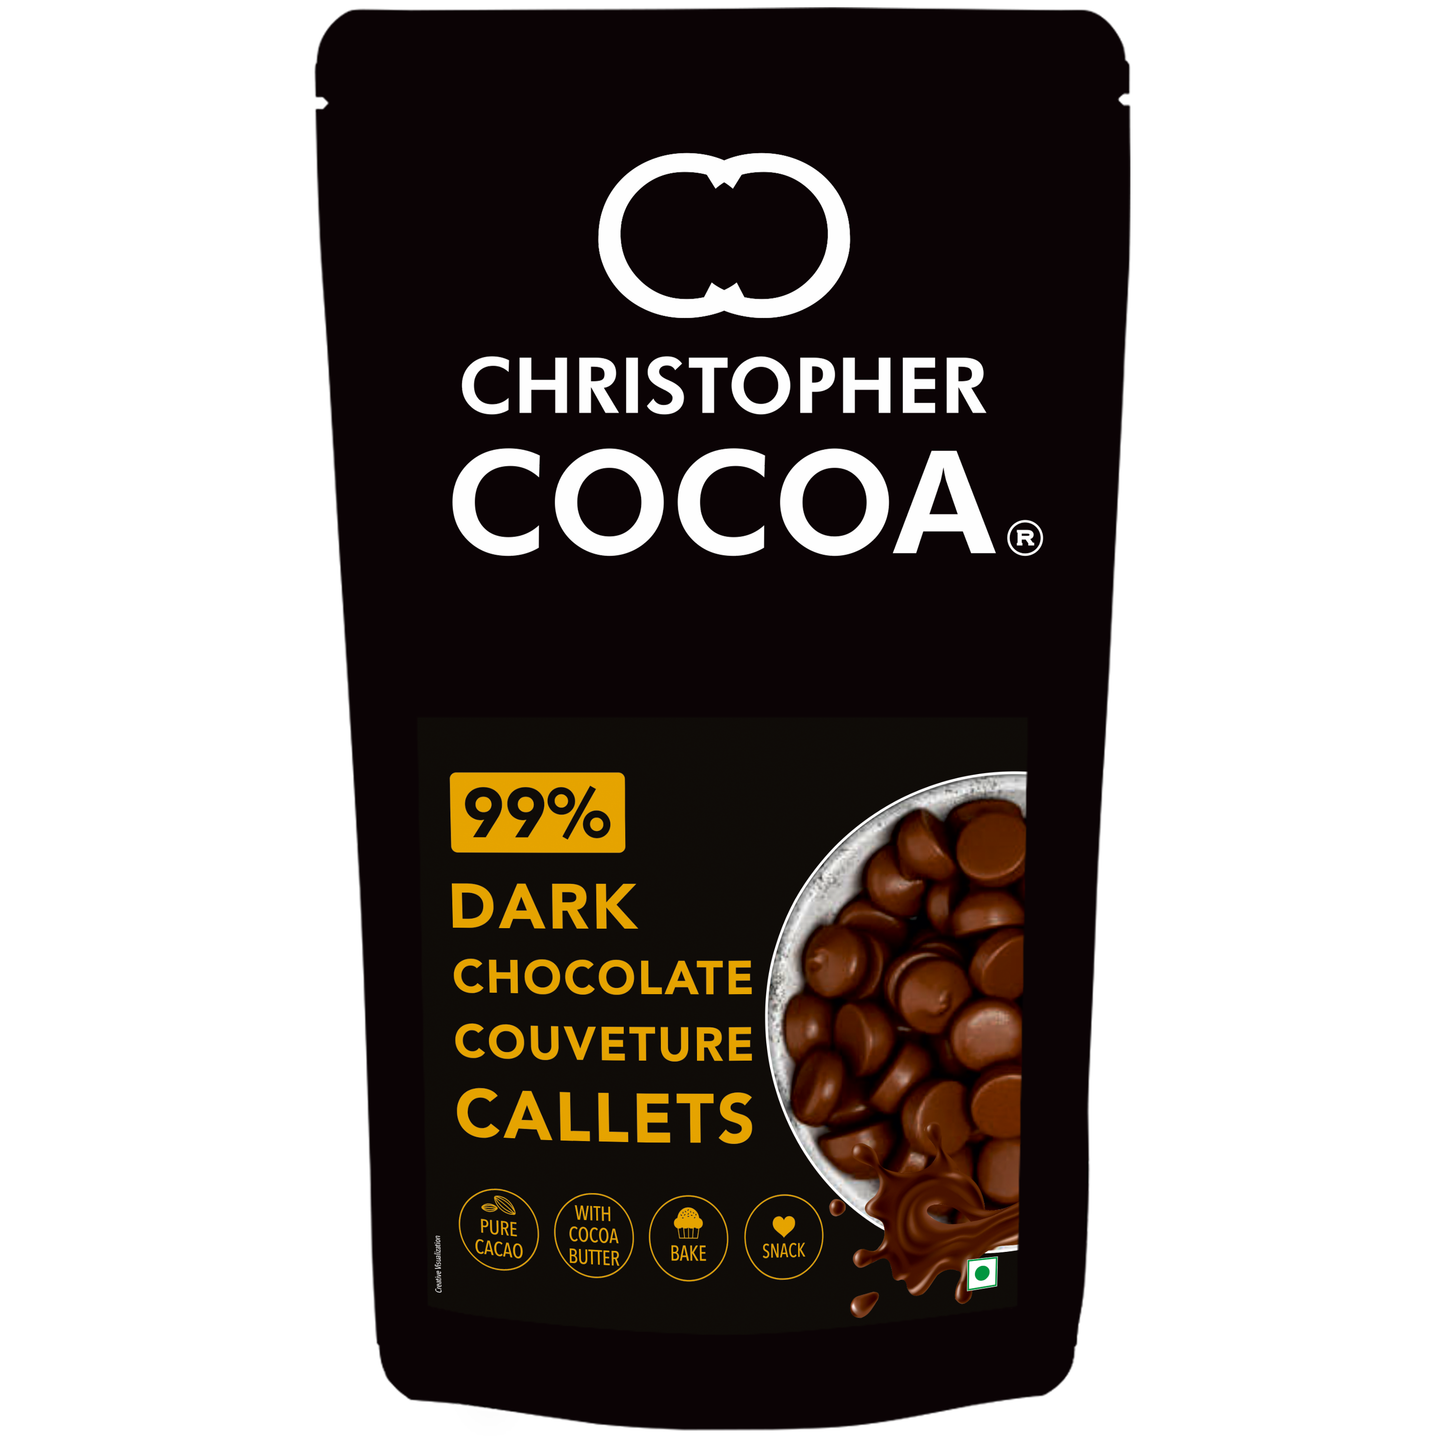 Christopher Cocoa 99% Pure Dark Chocolate Couverture Callets 1Kg (Chocolate Chips, Buttons, Snack, Bake, Cake, Hot Chocolate) 